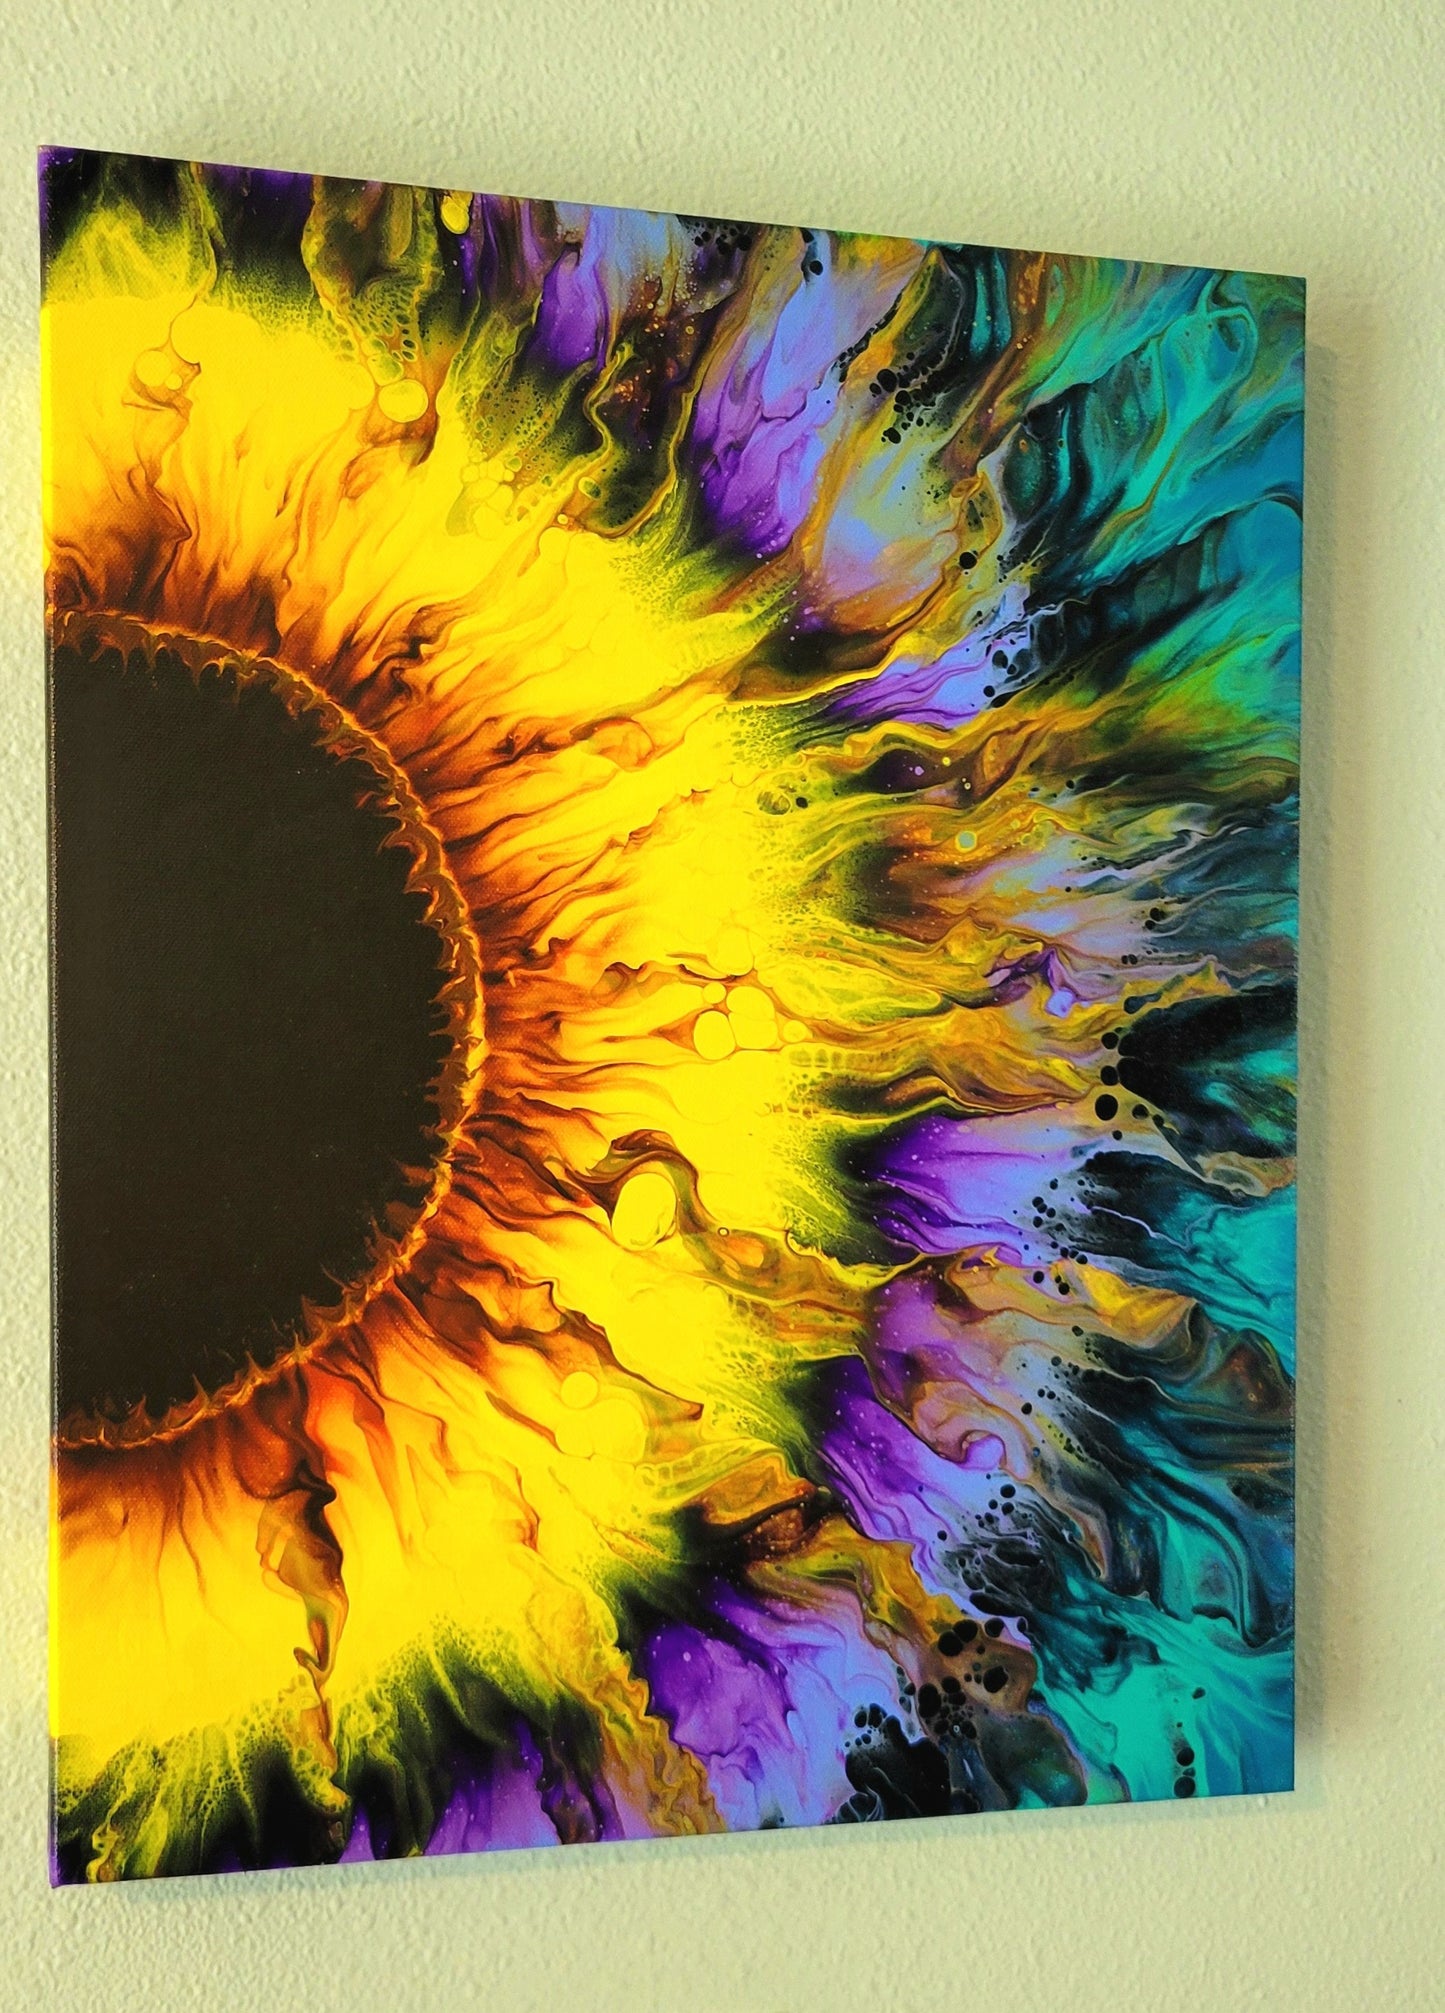 Original Sunflower Painting 16x20 inch Gallery Wrapped Deep Edge Canvas